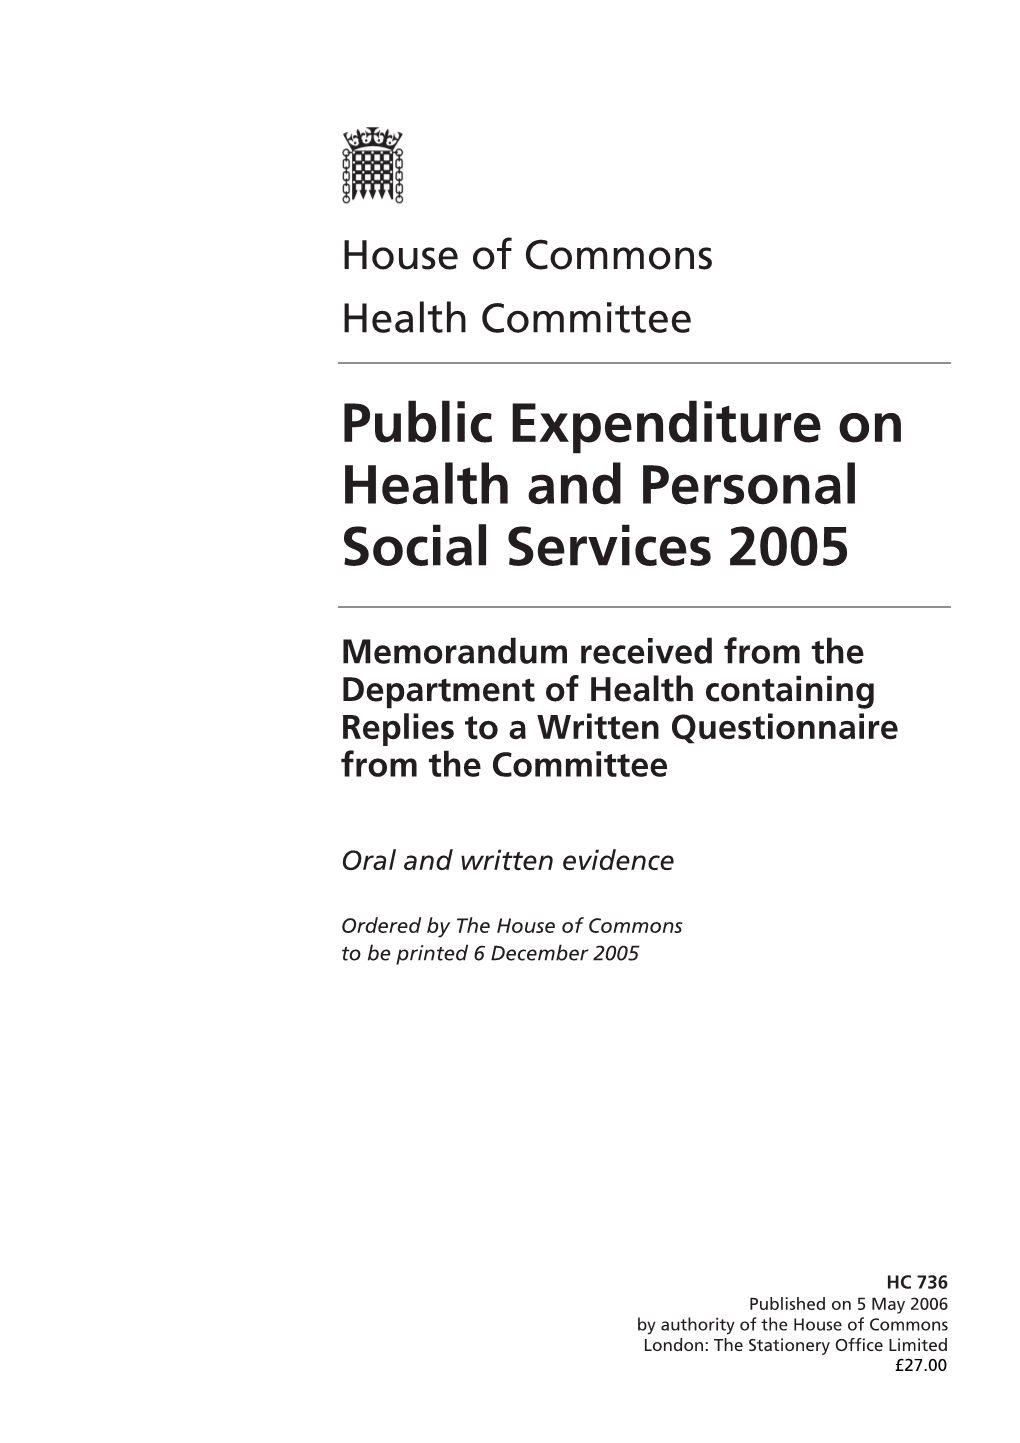 Public Expenditure on Health and Personal Social Services 2005